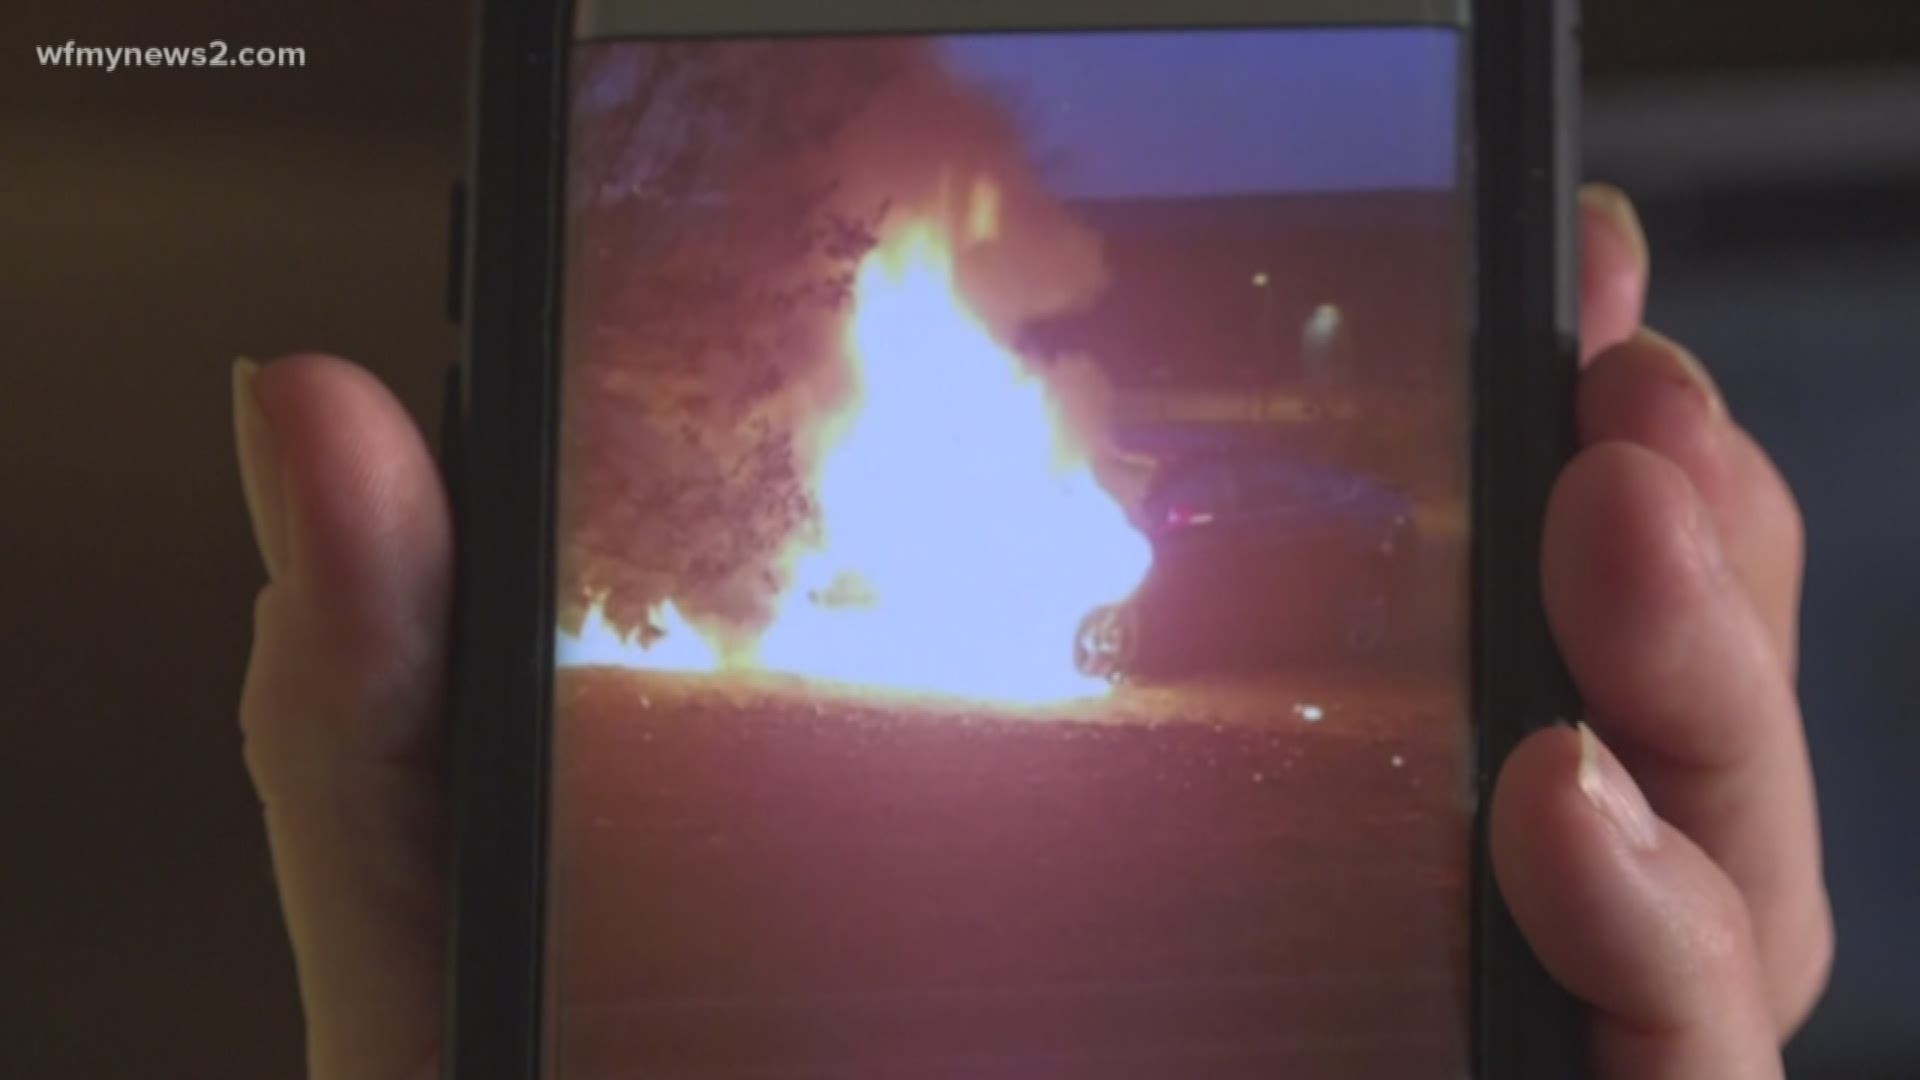 Woman's car catches on fire due to recalled part, struggles with ford to get refund.